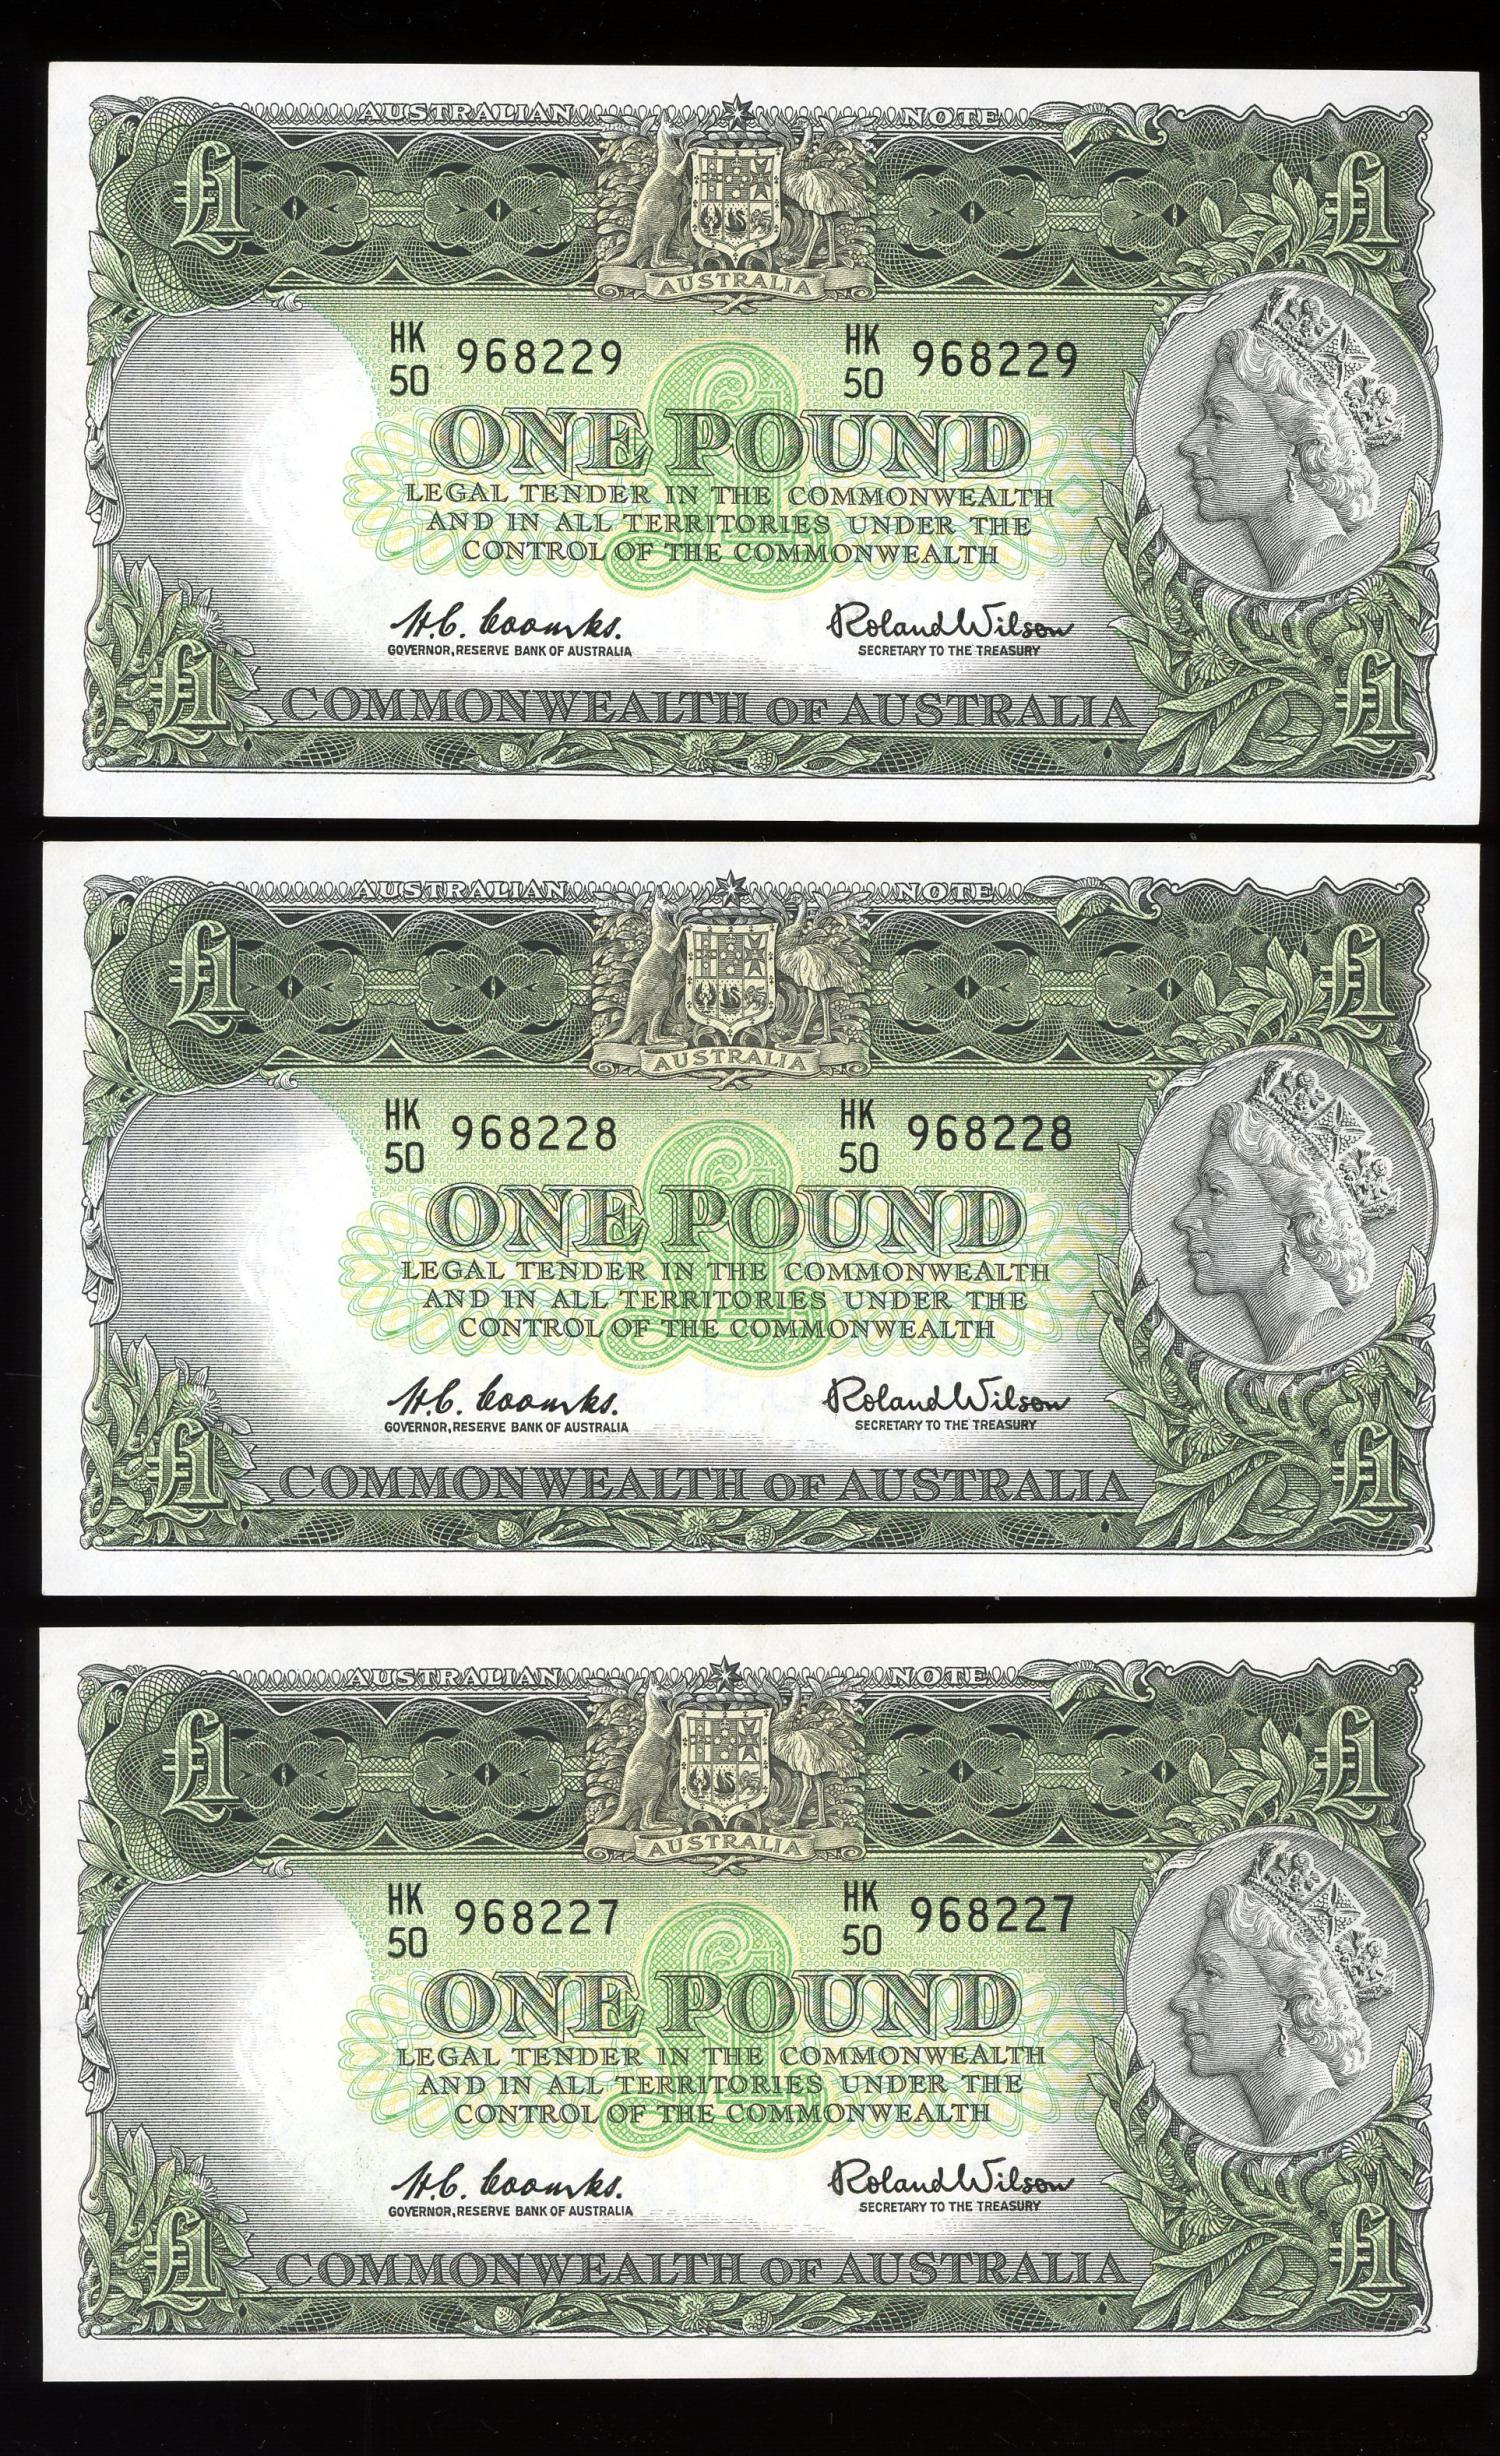 Thumbnail for 1961 Consecutive Trio Coombs-Wilson One Pound Notes HK50 968227-29 EF